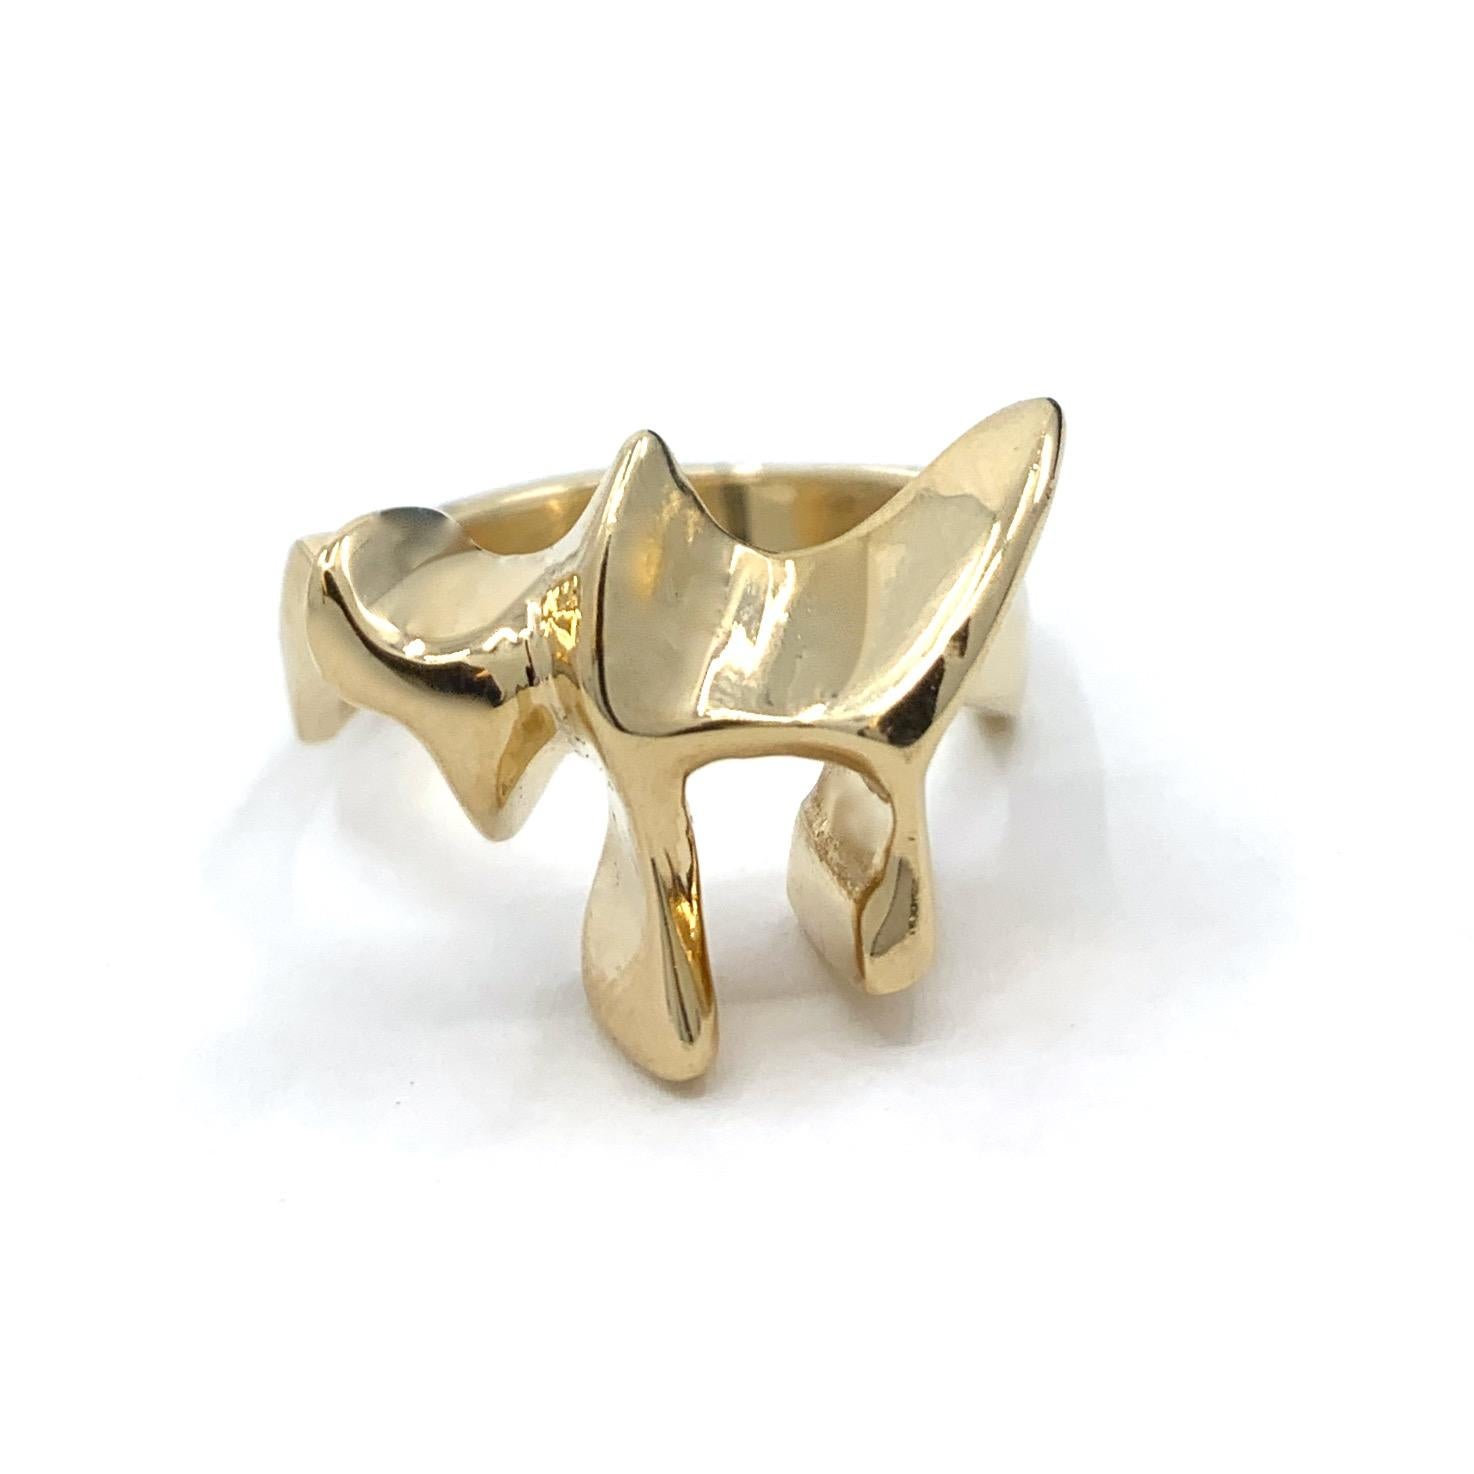 Sculpted & Modernist Chai Symbol Ring in Polished Yellow Gold In New Condition For Sale In Sherman Oaks, CA